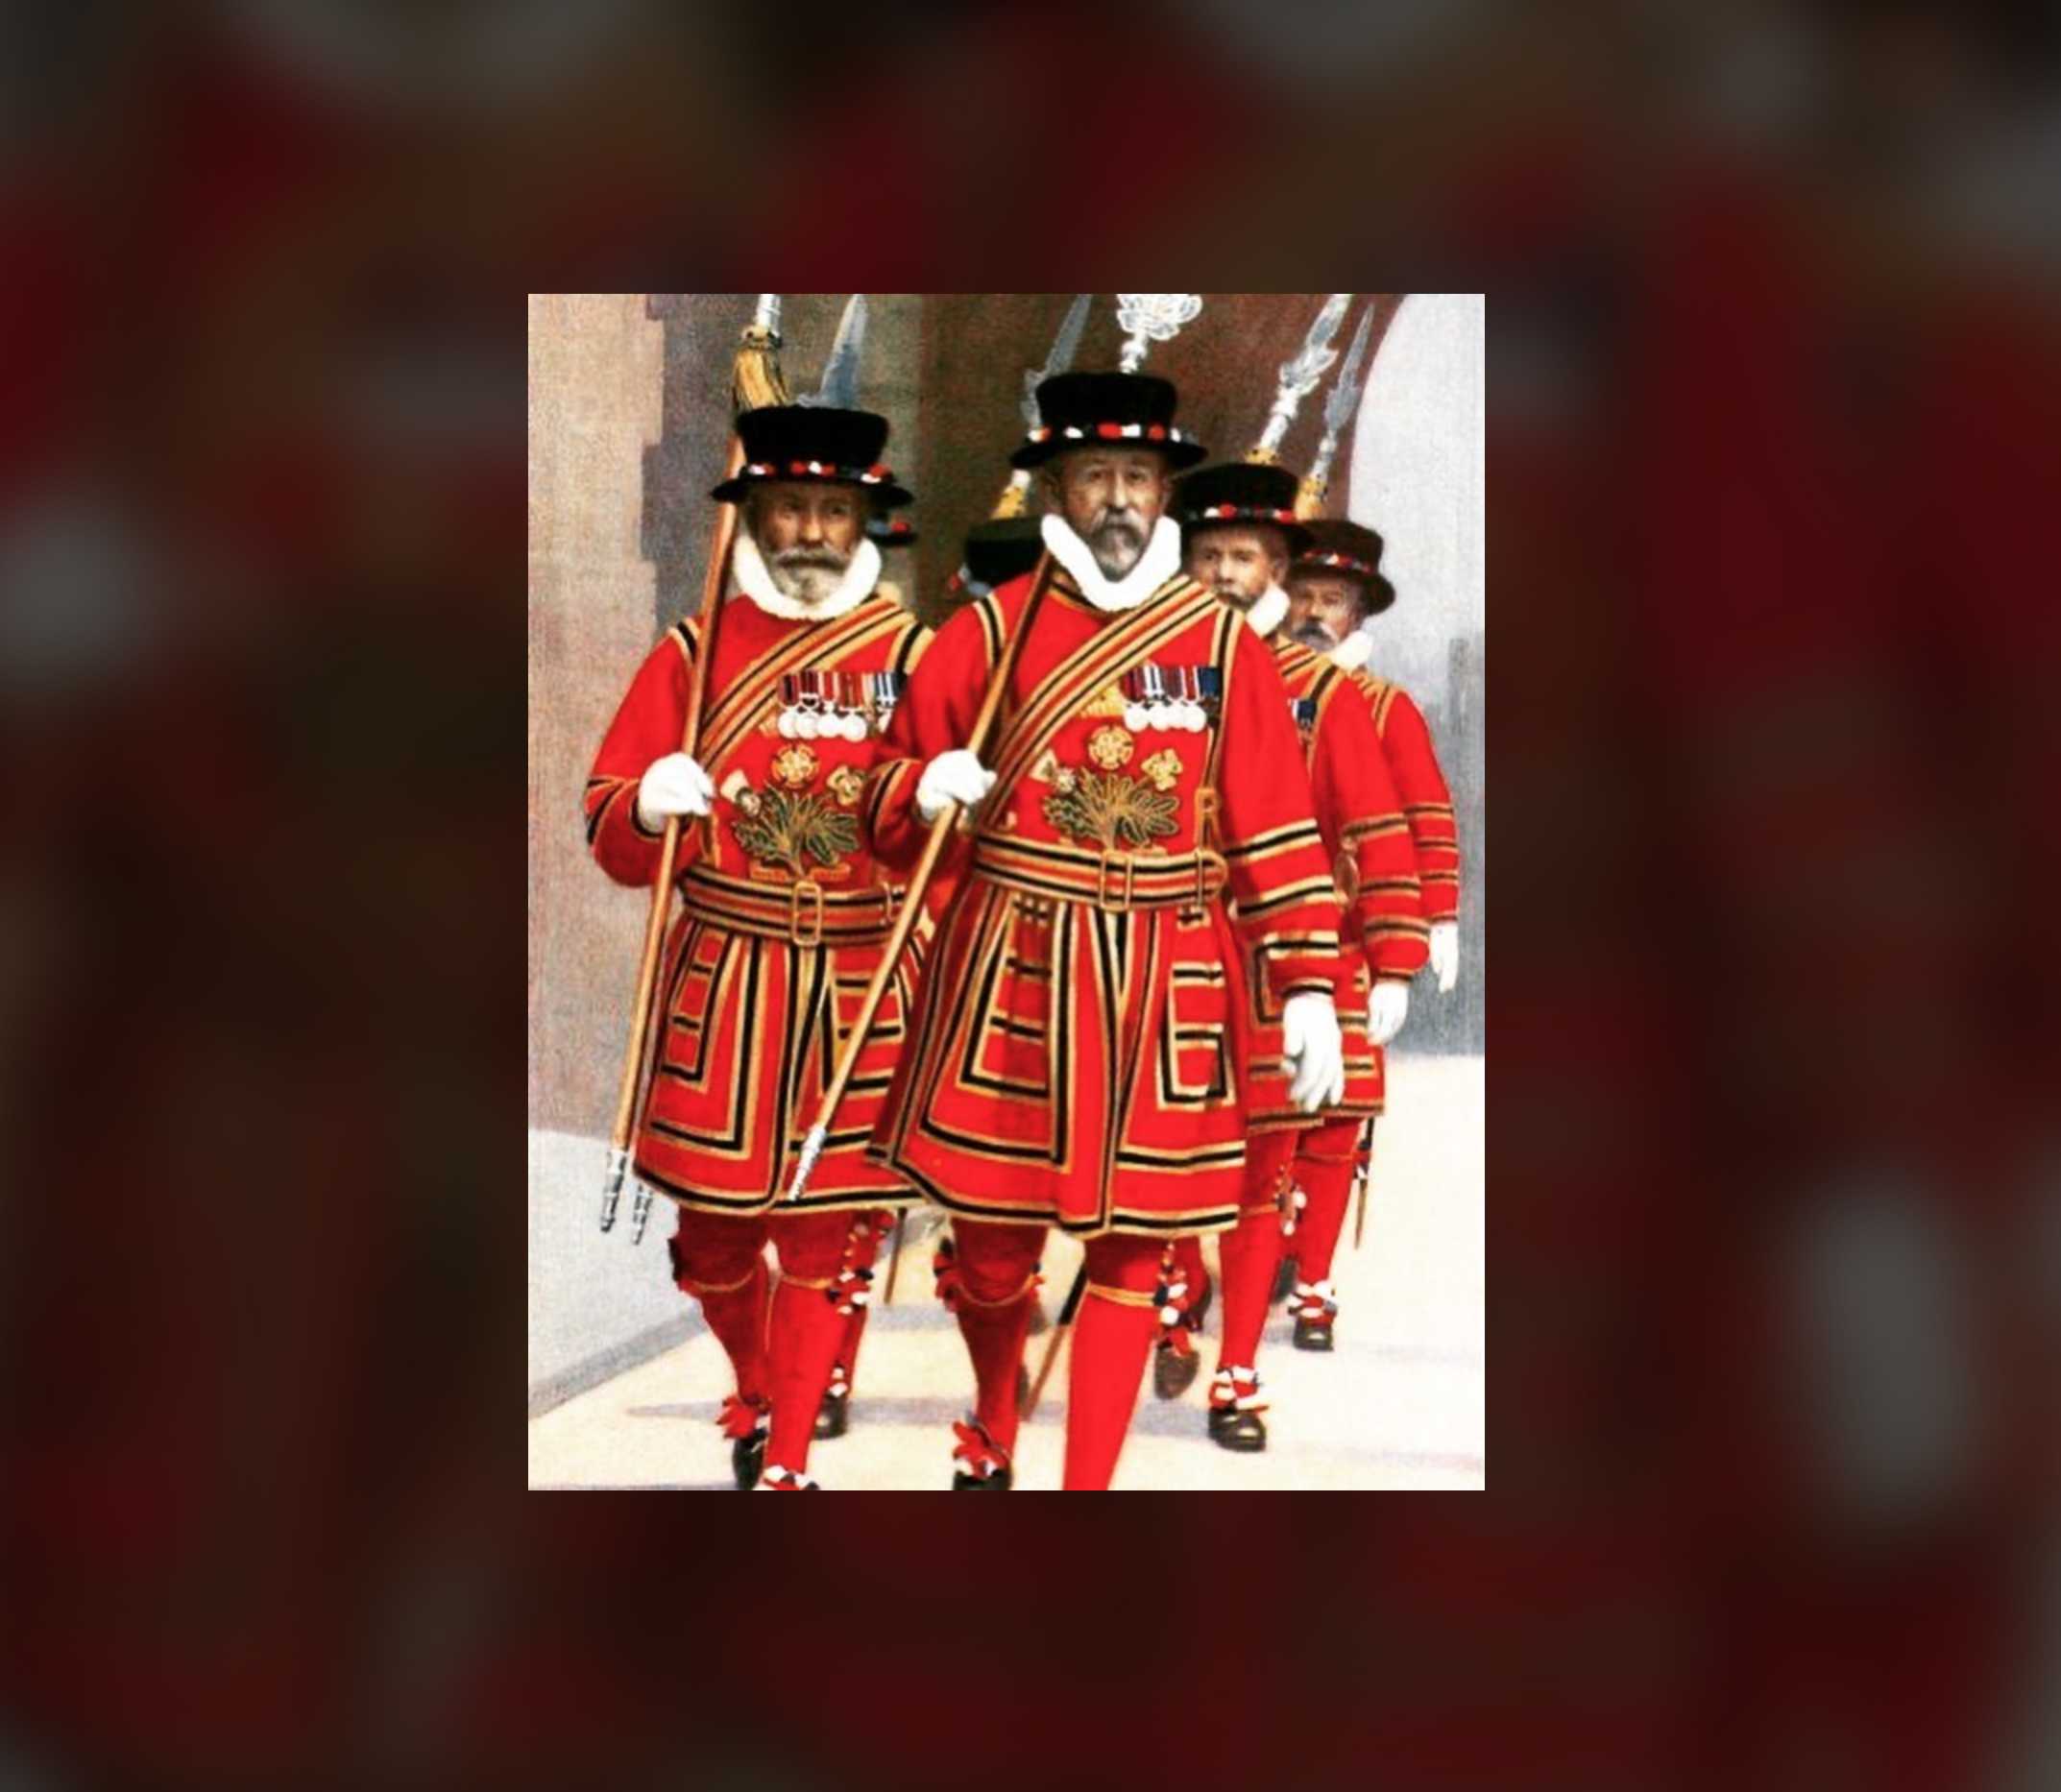 The “Beefeaters”